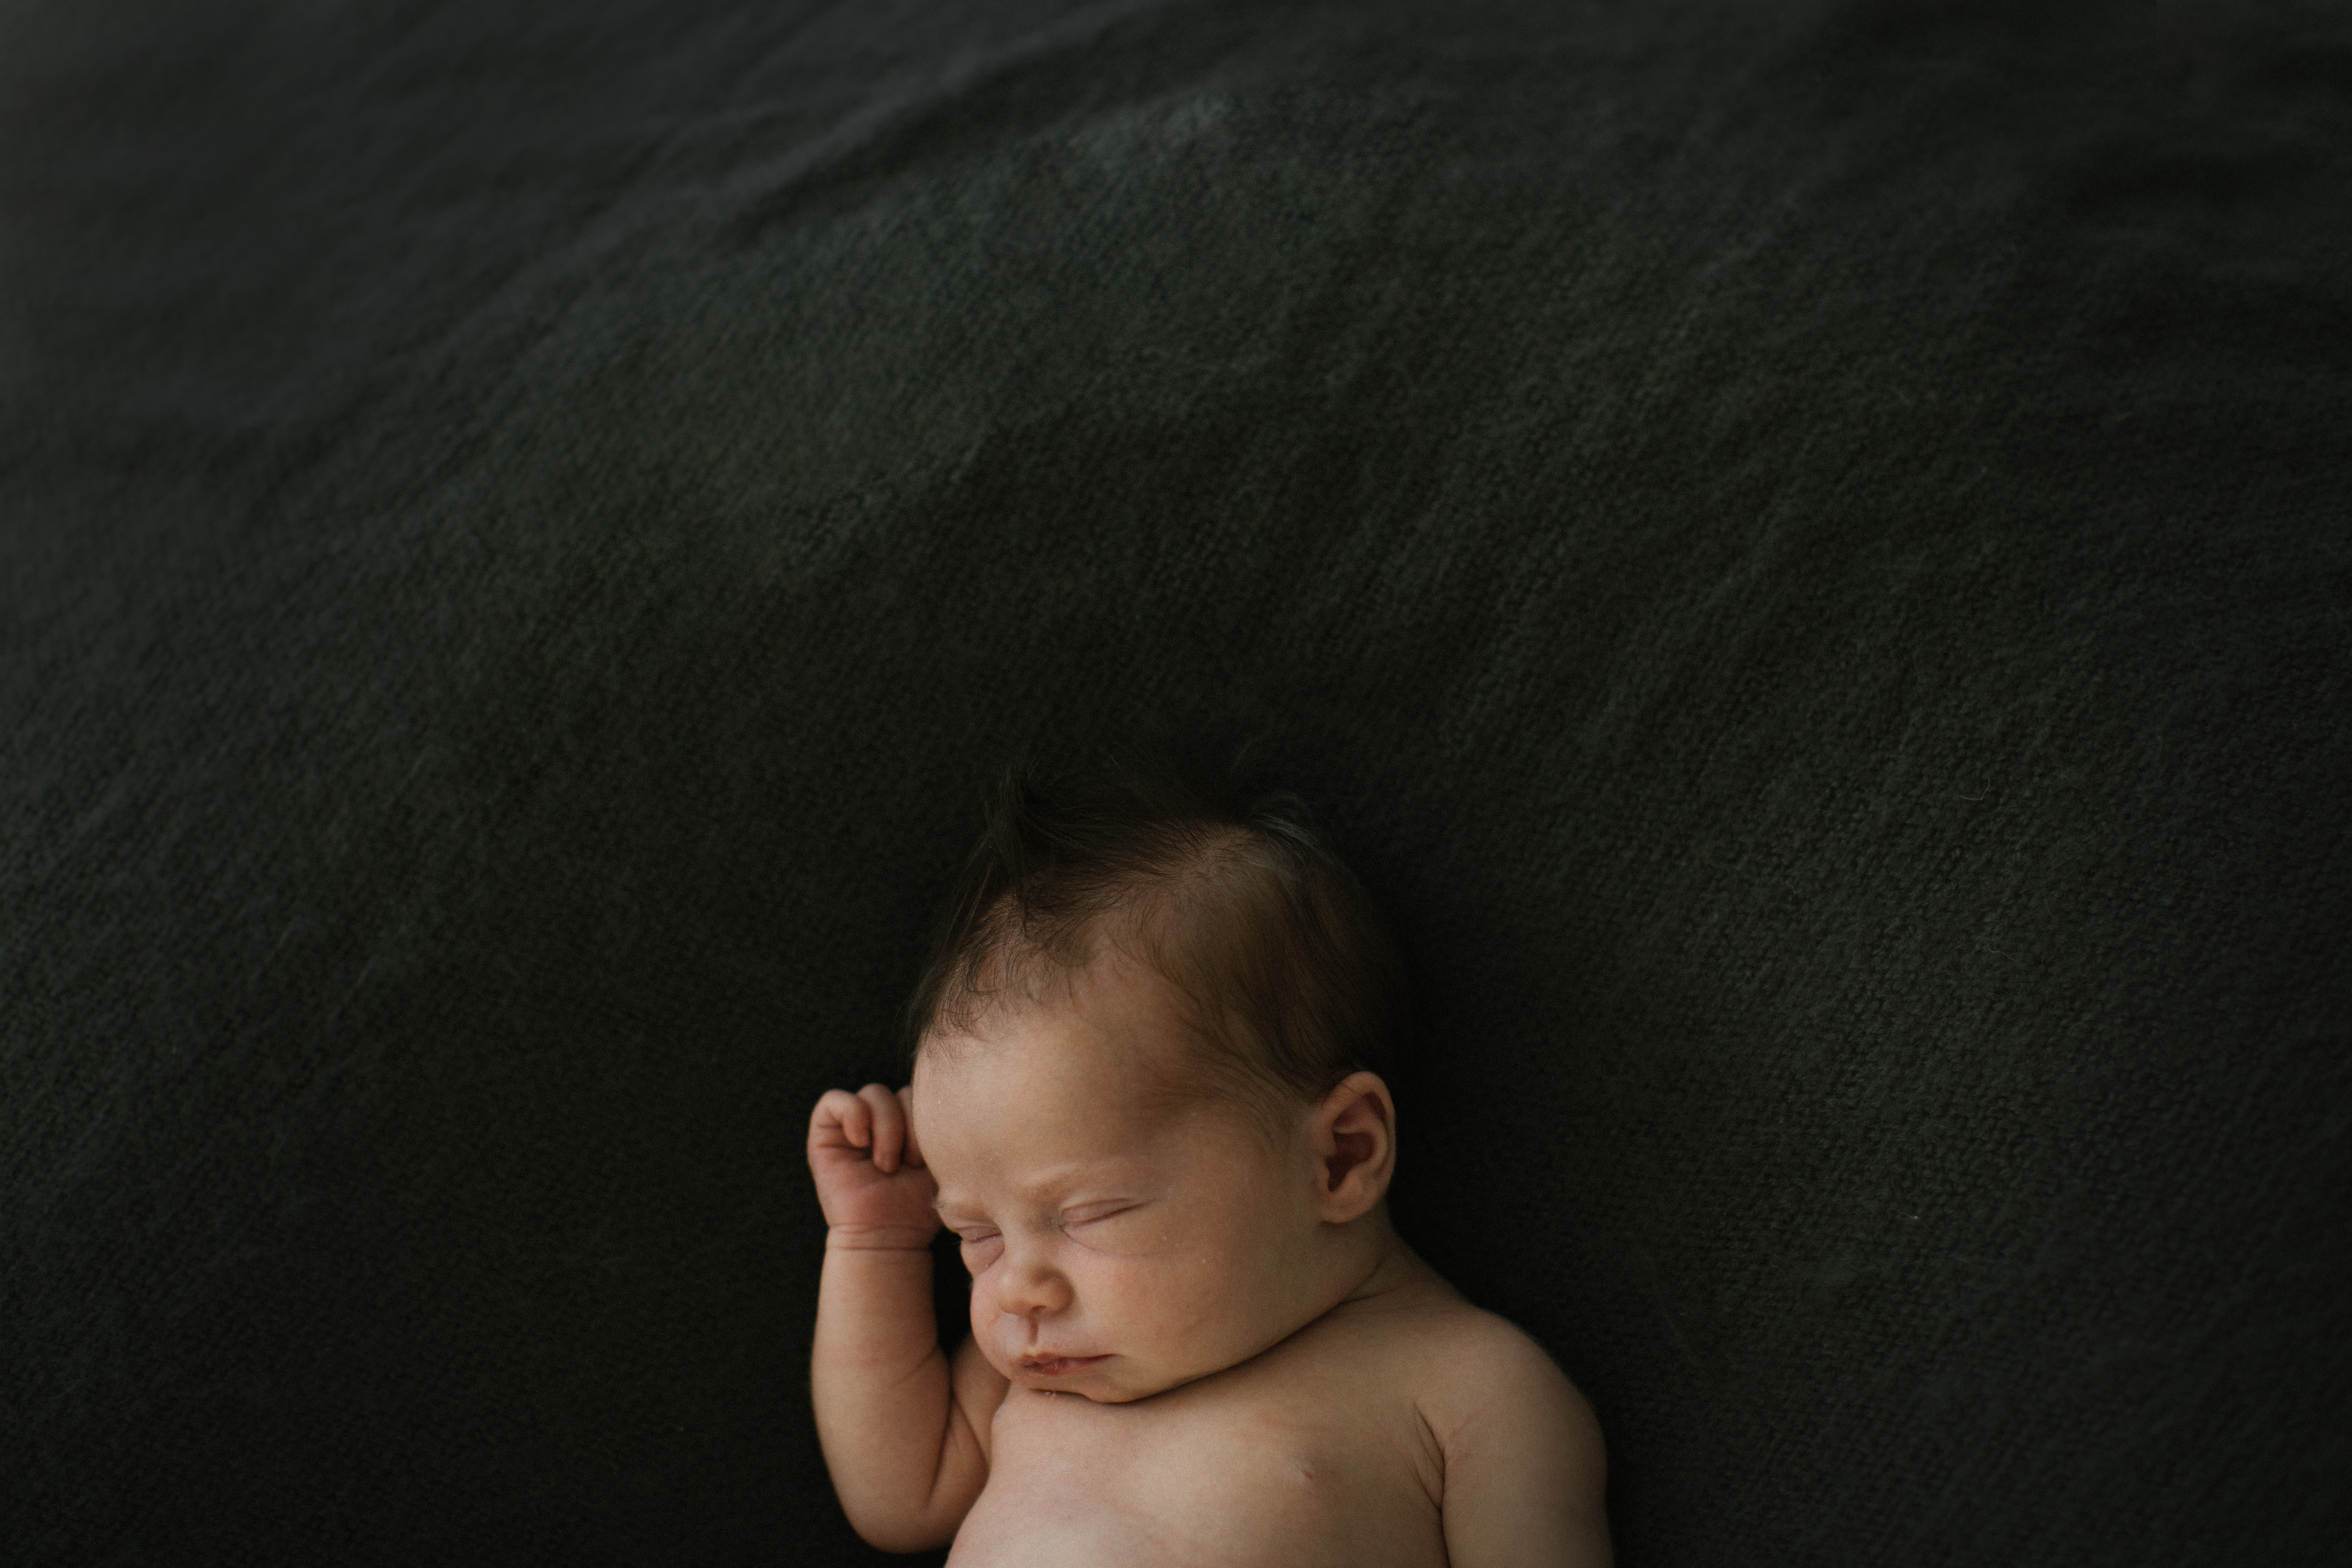 Chicago Illinois newborn photographer Laurie Baker with Elle Baker Photography captures natural newborn photos